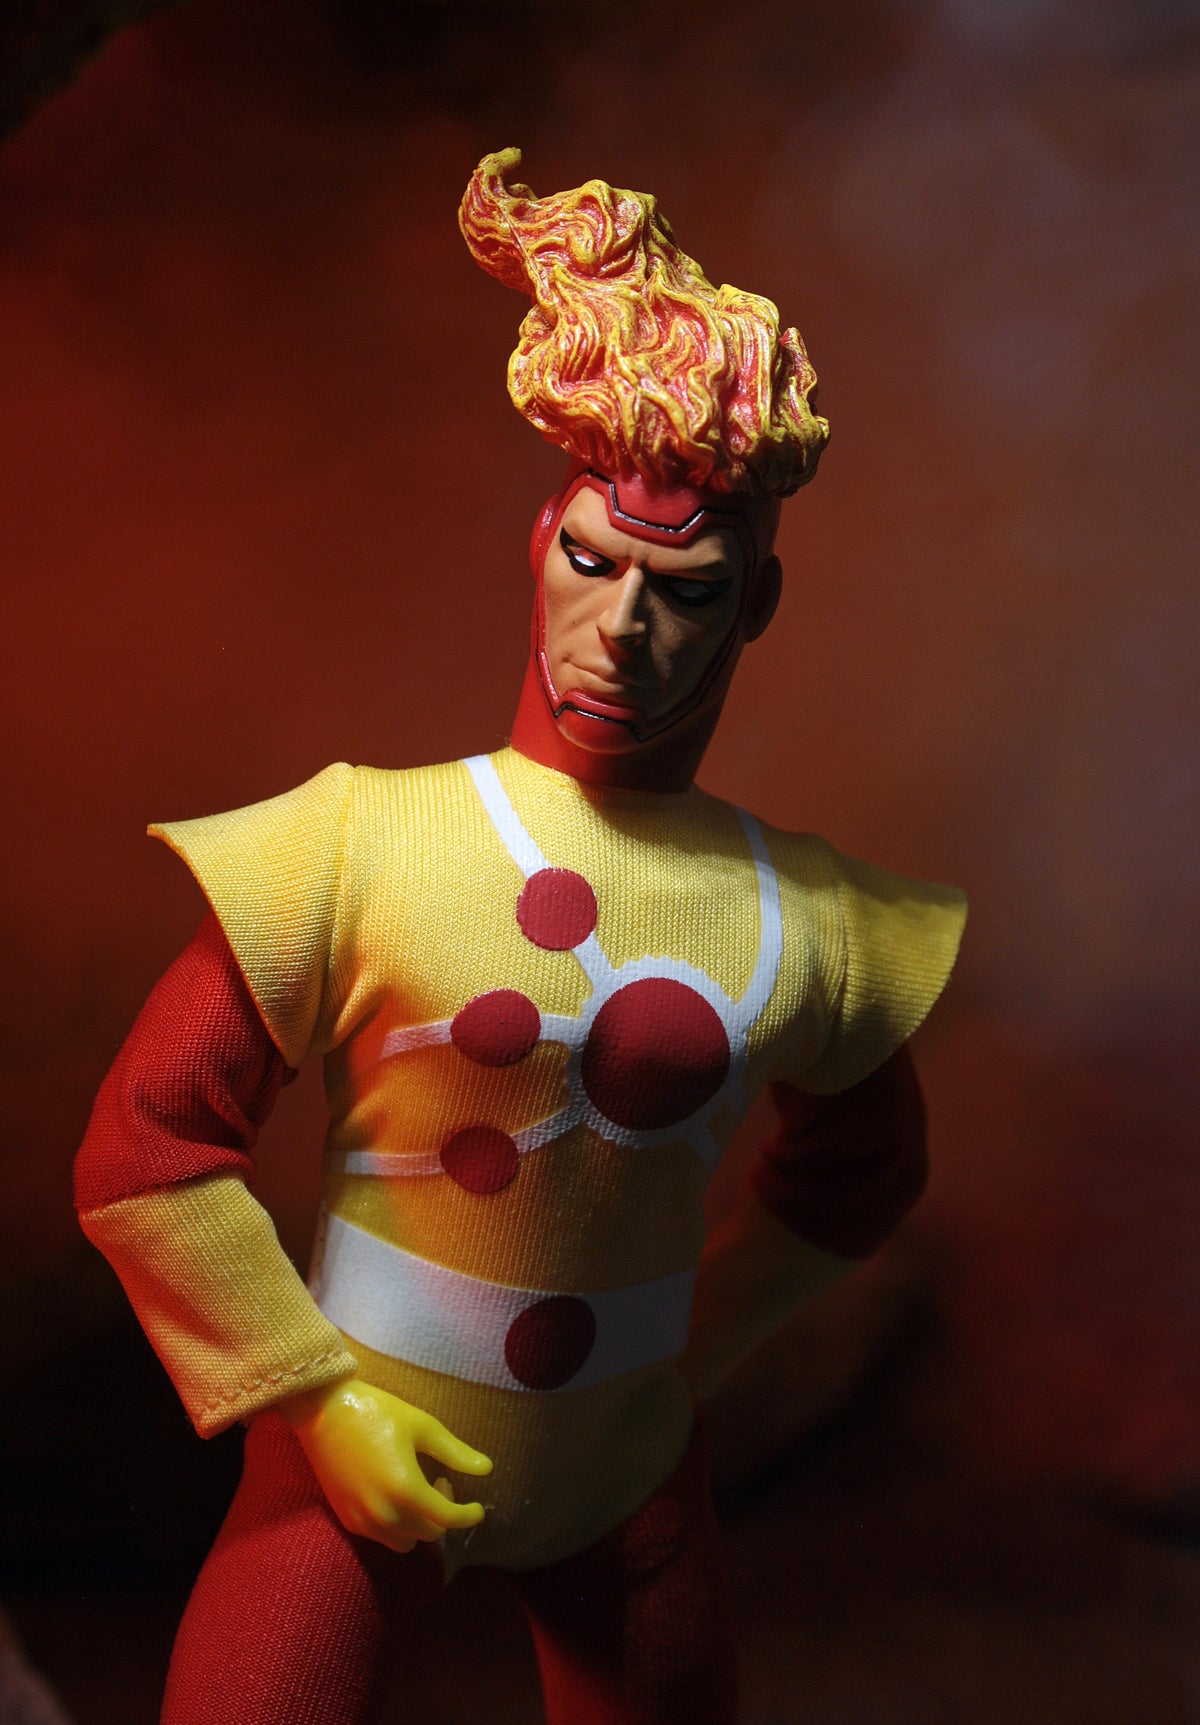 Damaged Package Mego Wave 18 - Firestorm 50th Anniversary World's Greatest Superheroes 8" Action Figure